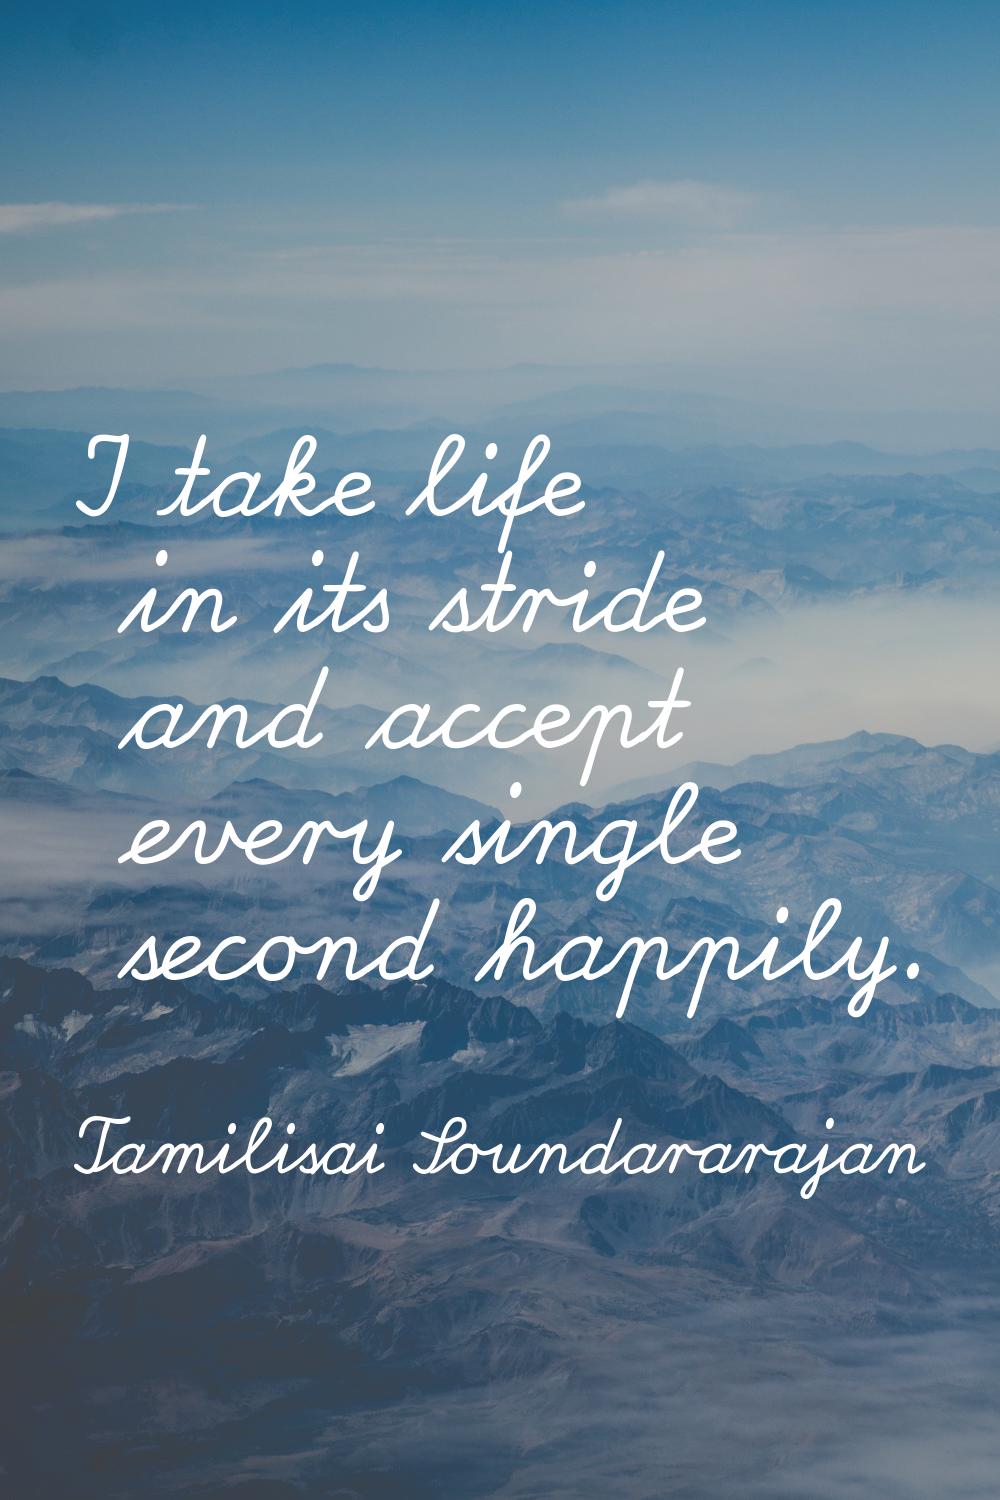 I take life in its stride and accept every single second happily.